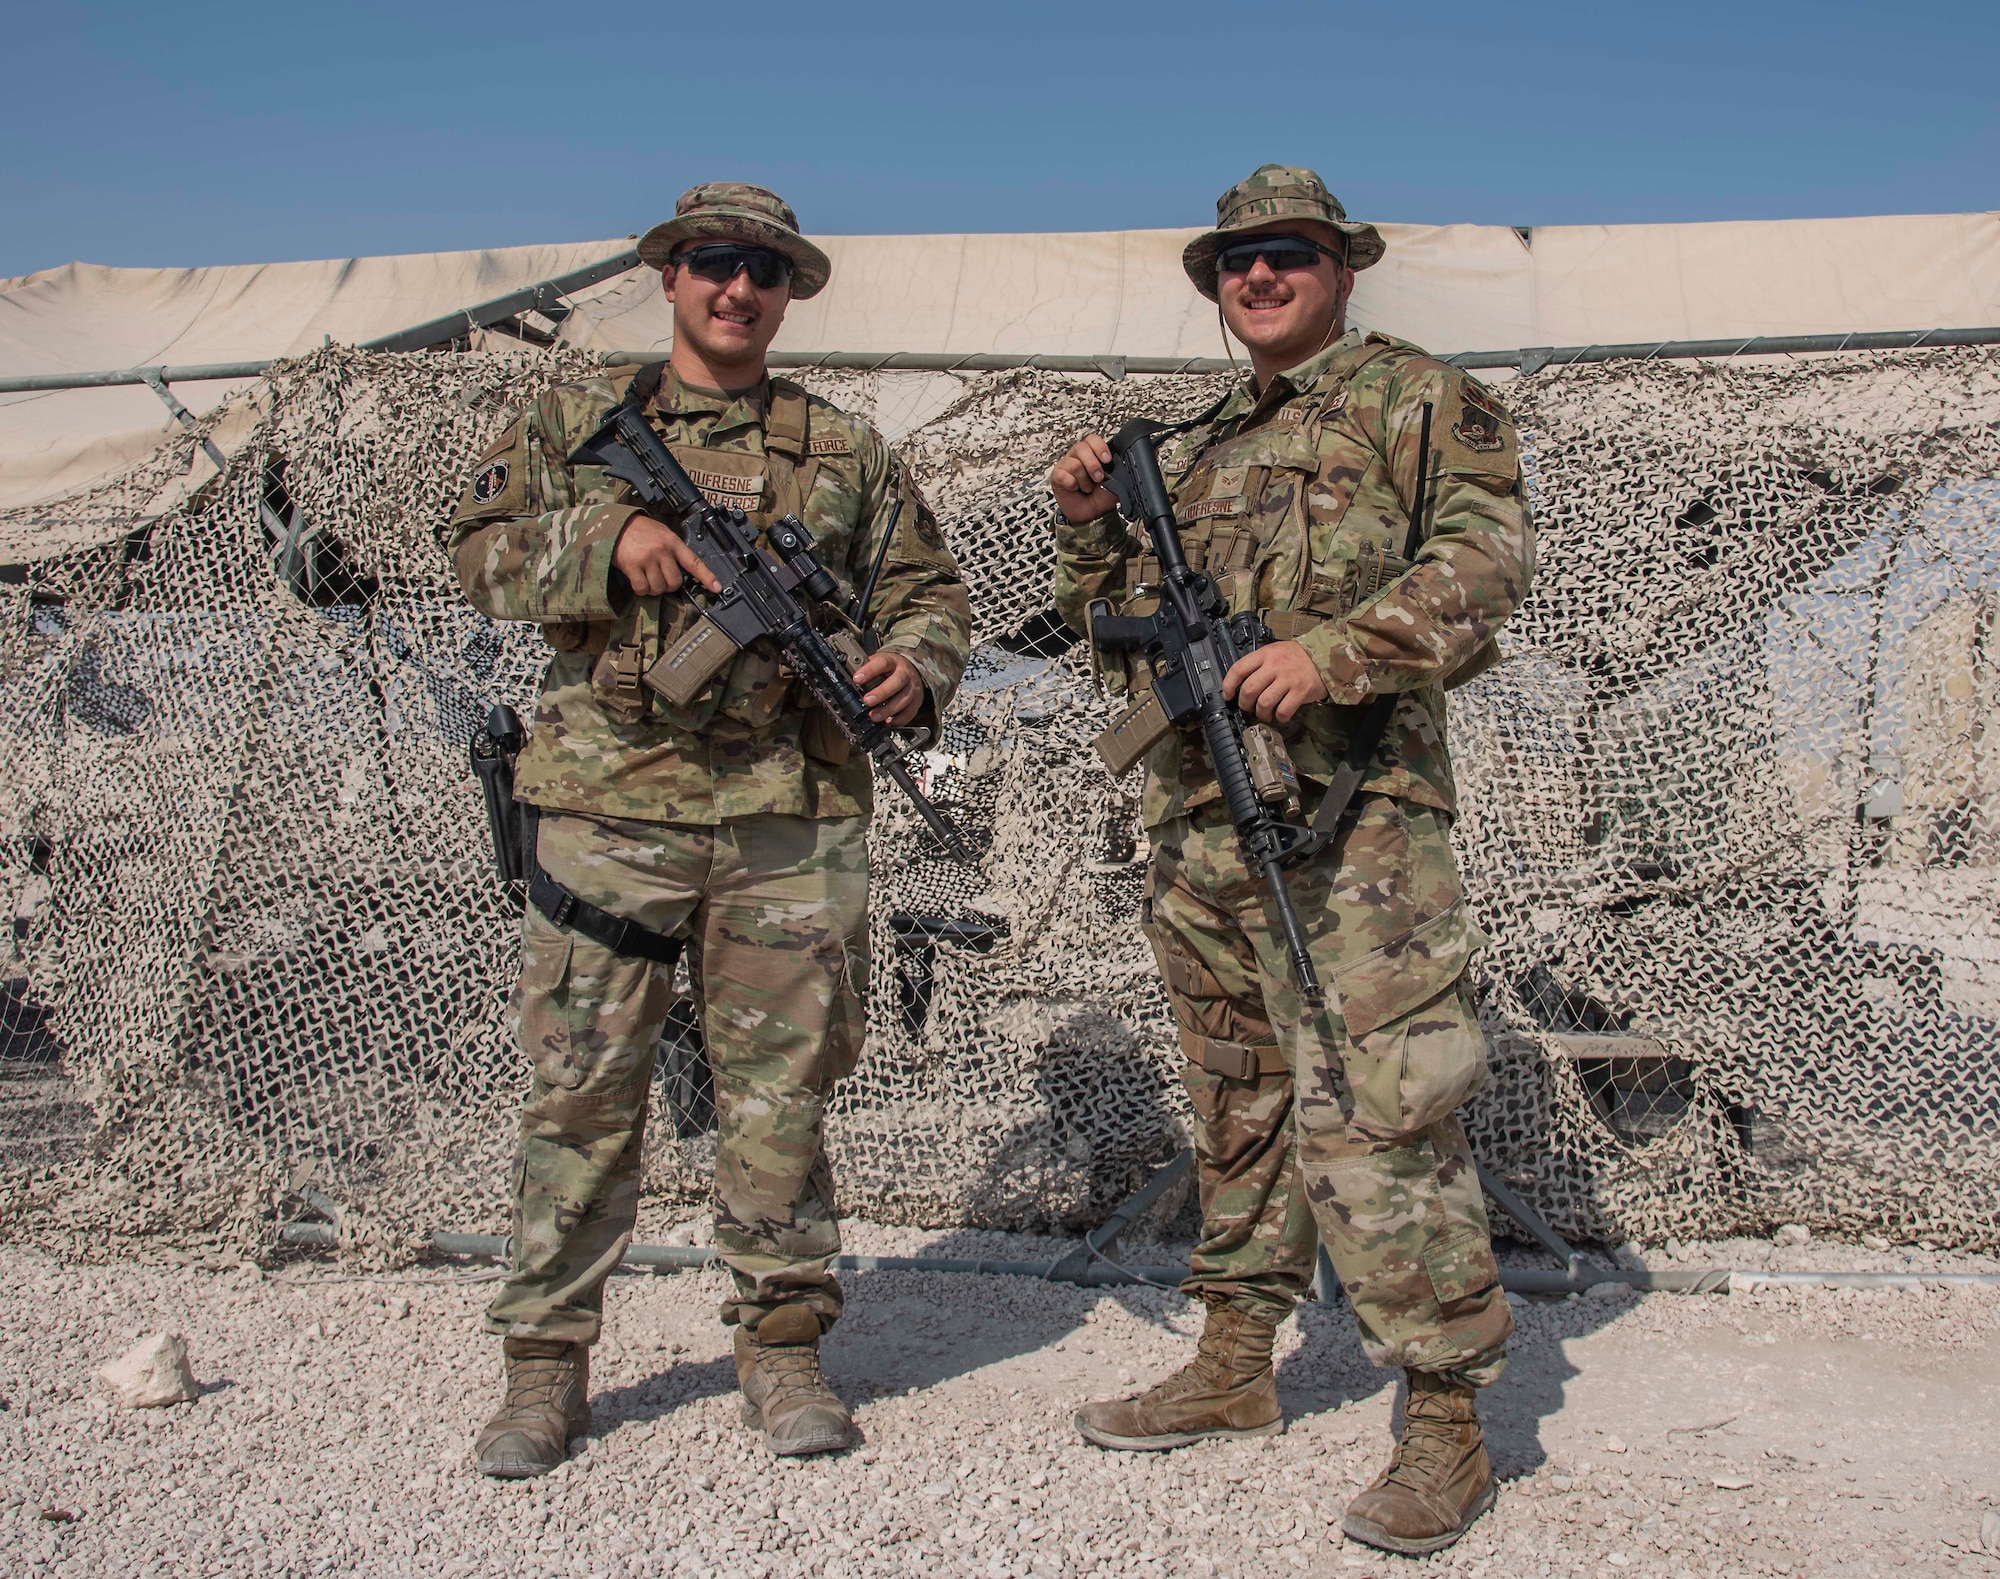 Senior Airman Christian Dufresne and Senior Airman Nicholas Dufresne, 379th Expeditionary Security Forces Squadron entry controllers, pose for a picture July 1, 2021, at Al Udeid Air Base, Qatar.